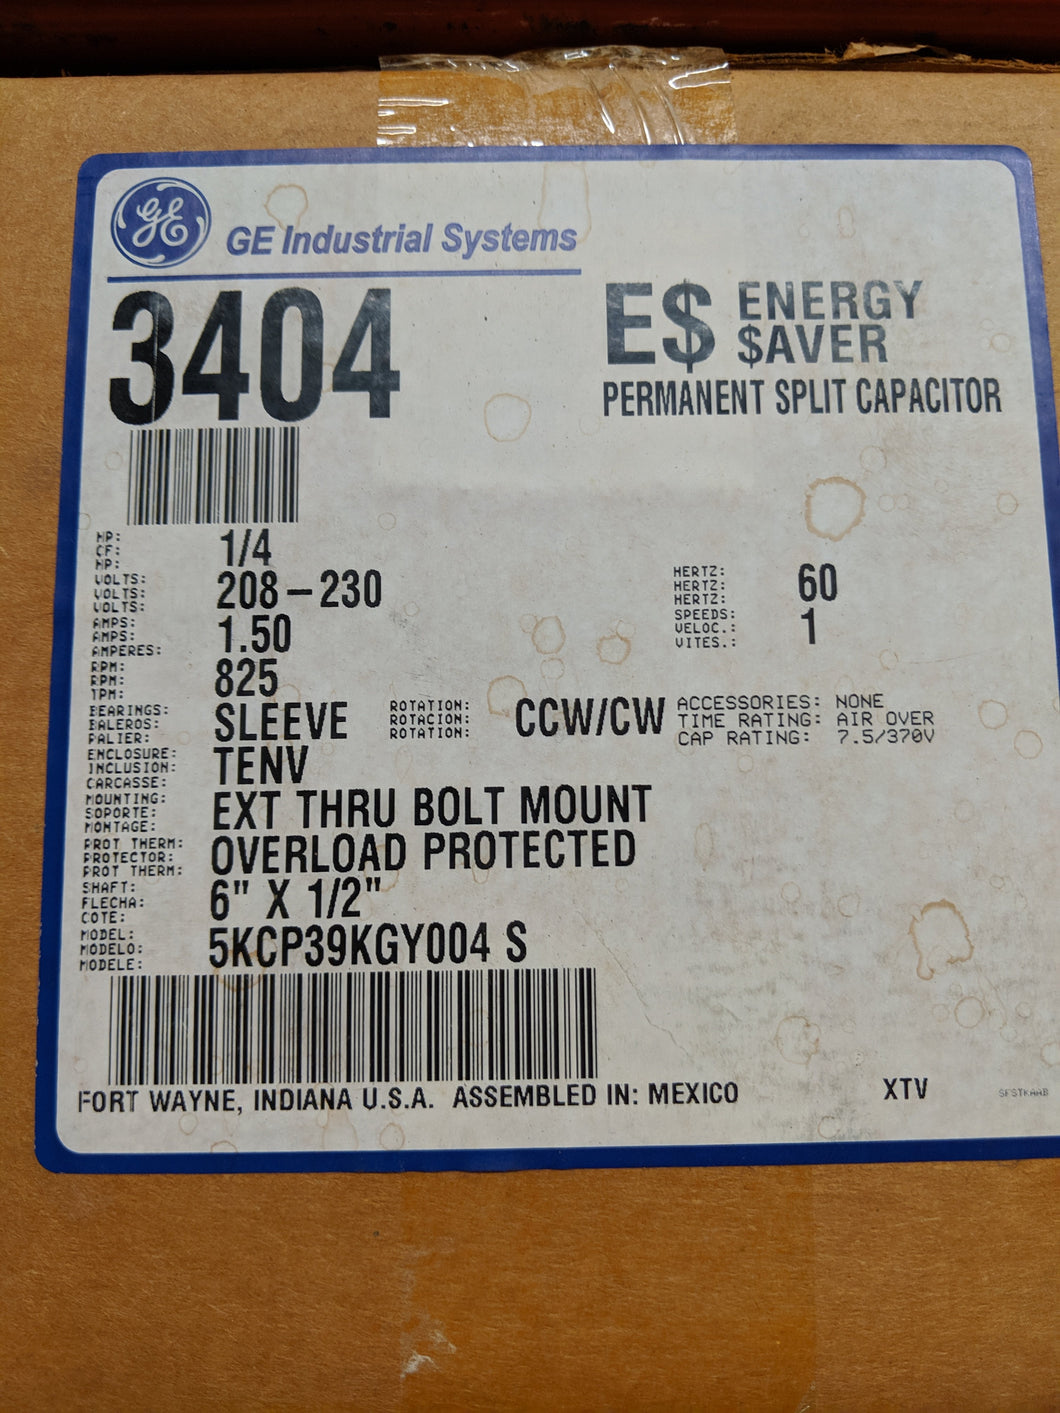 GE 3404, 1/4 HP, 208-230 Volts, 5KCP39KGY004S